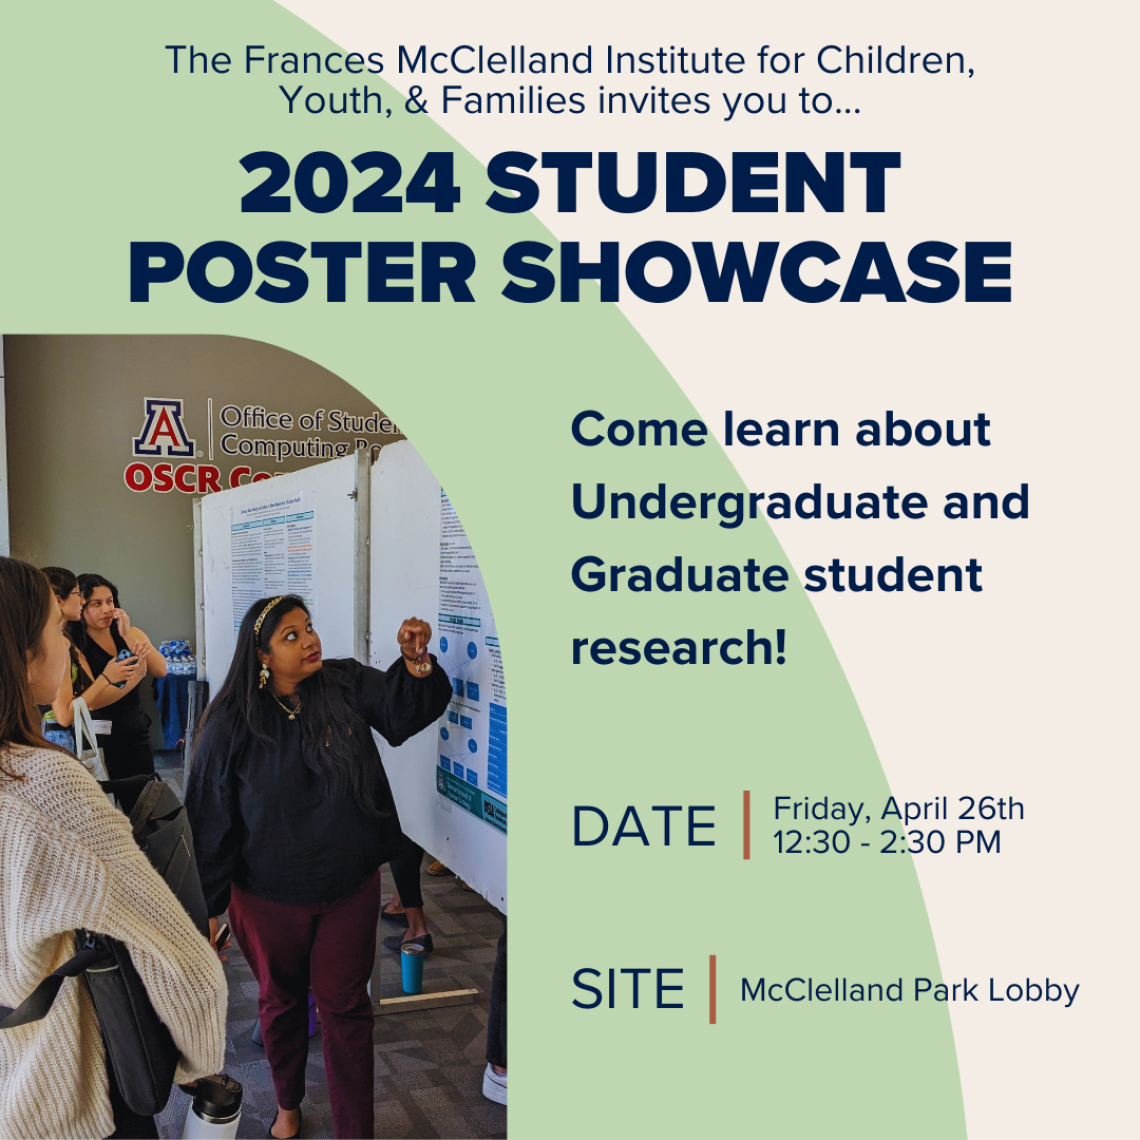 2024 student poster showcase flyer_updated